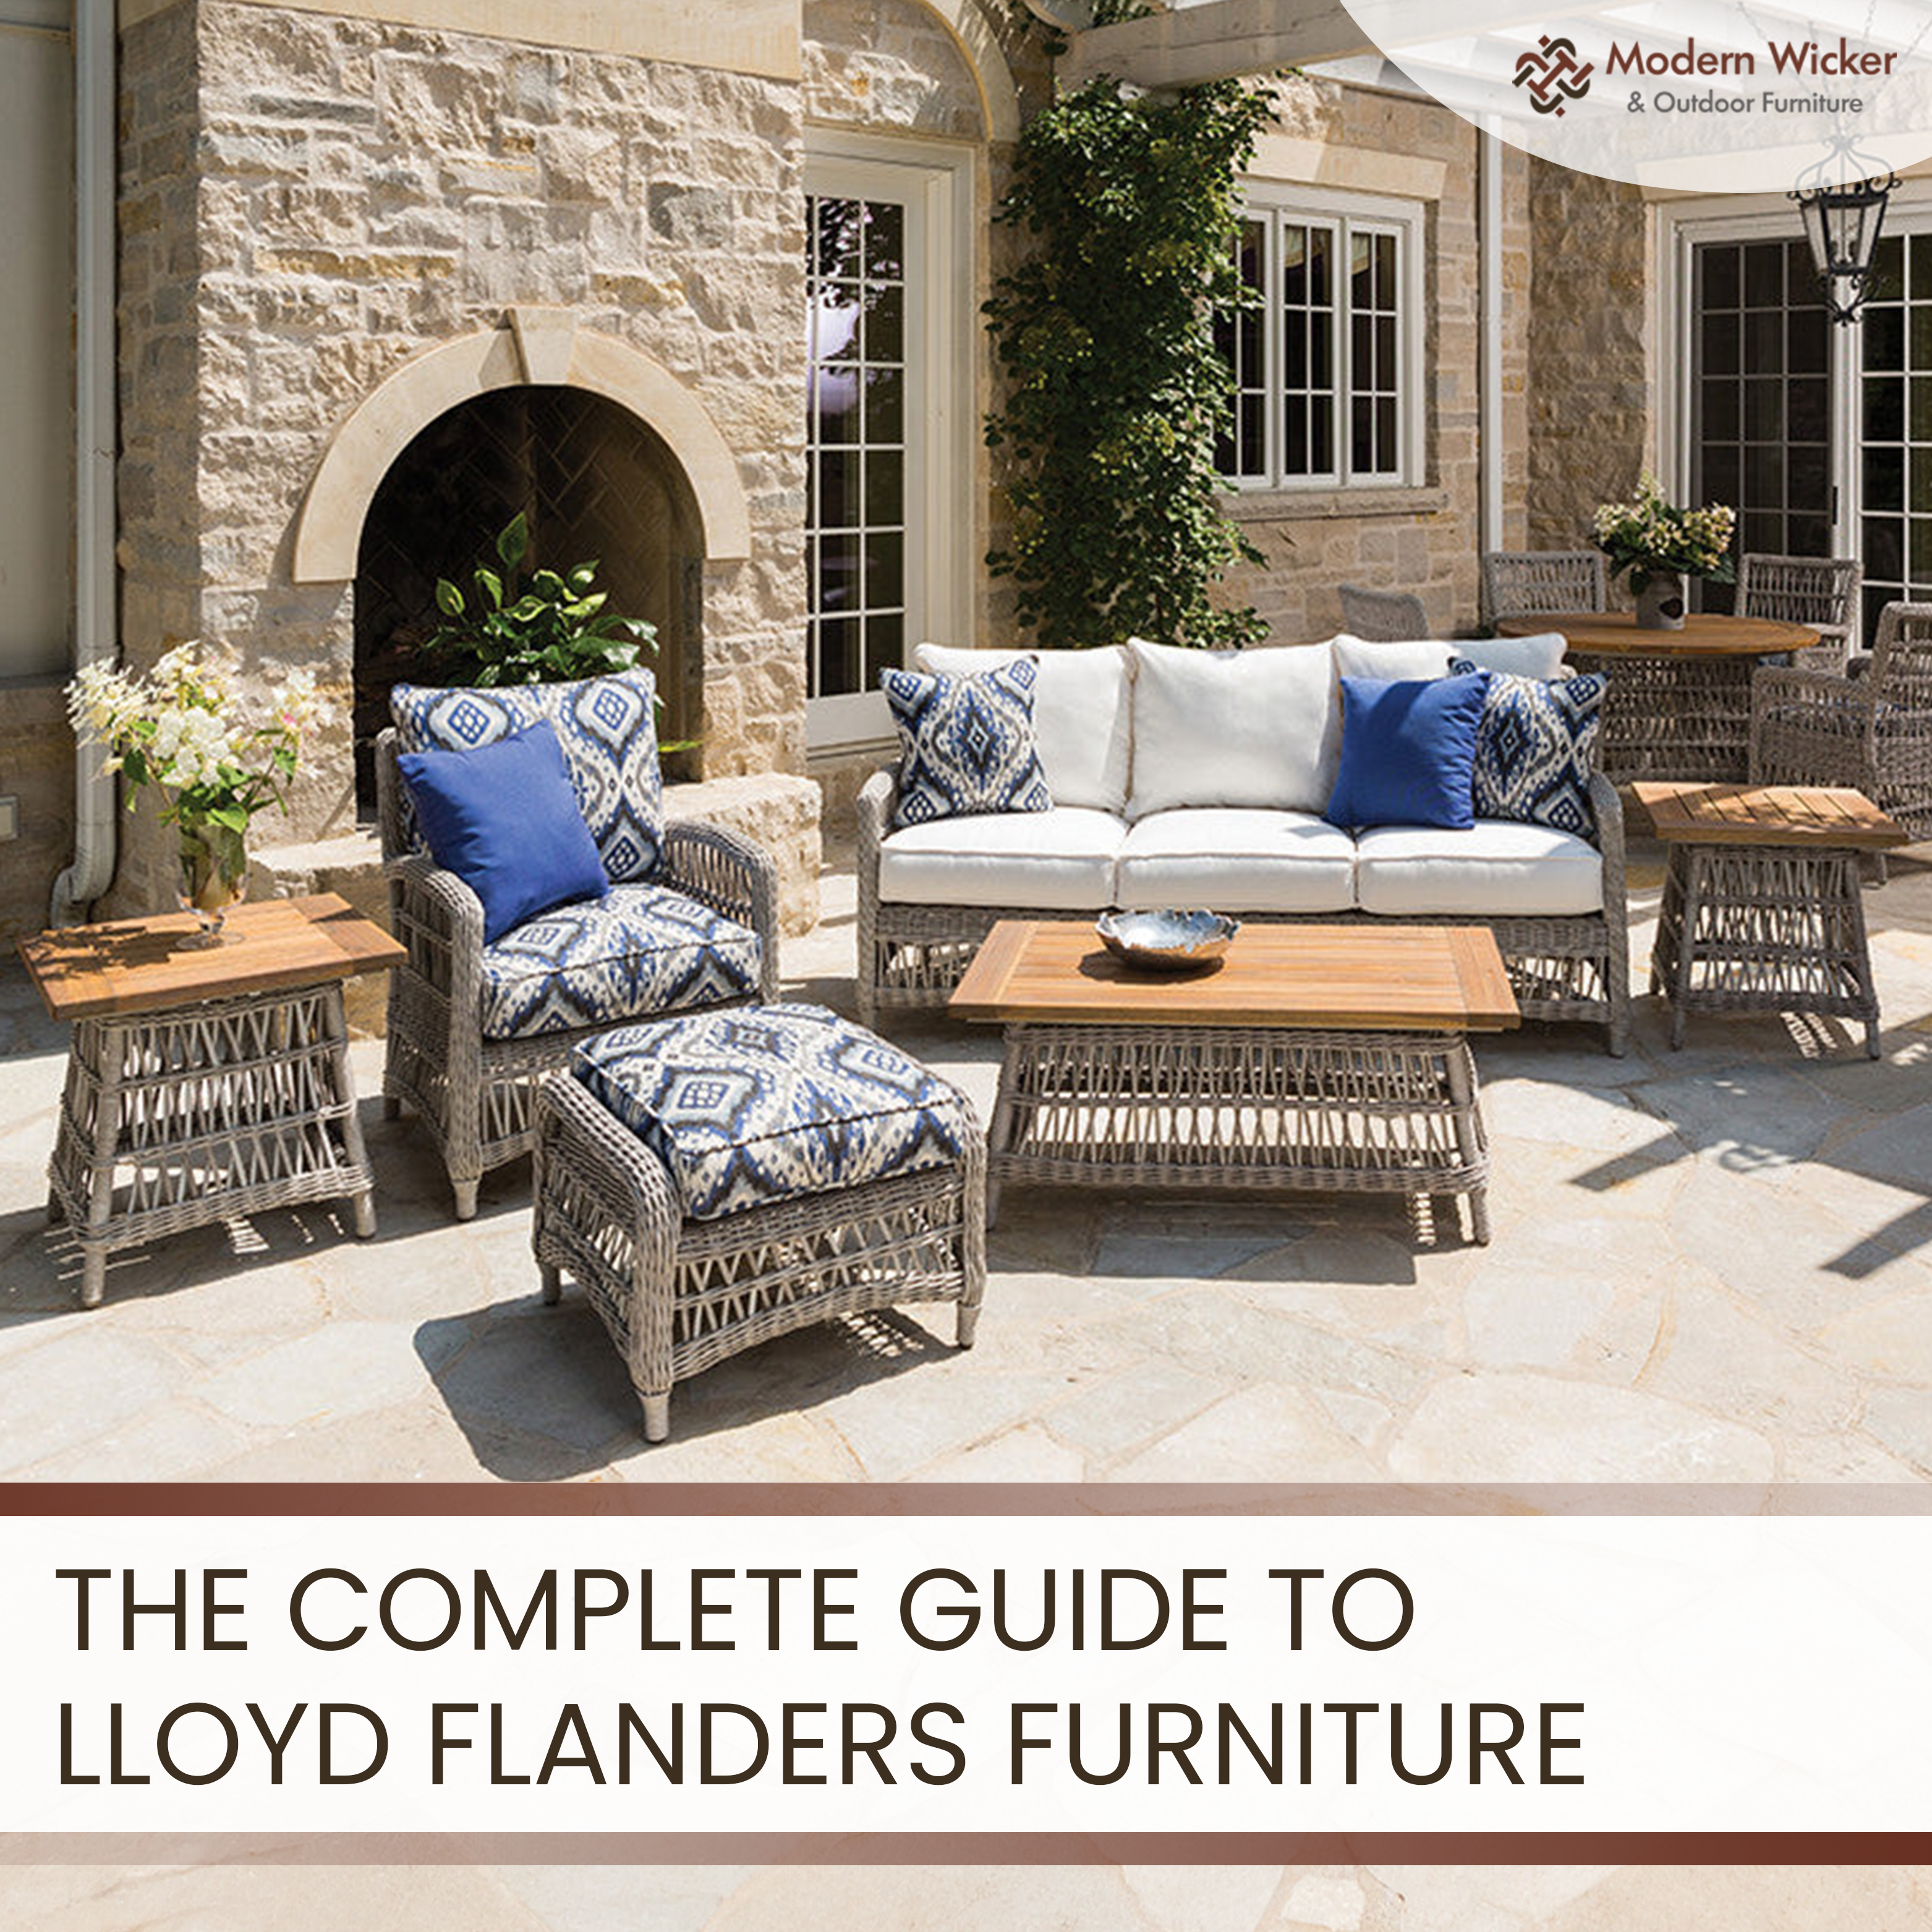 The Complete Guide to Lloyd Flanders Furniture